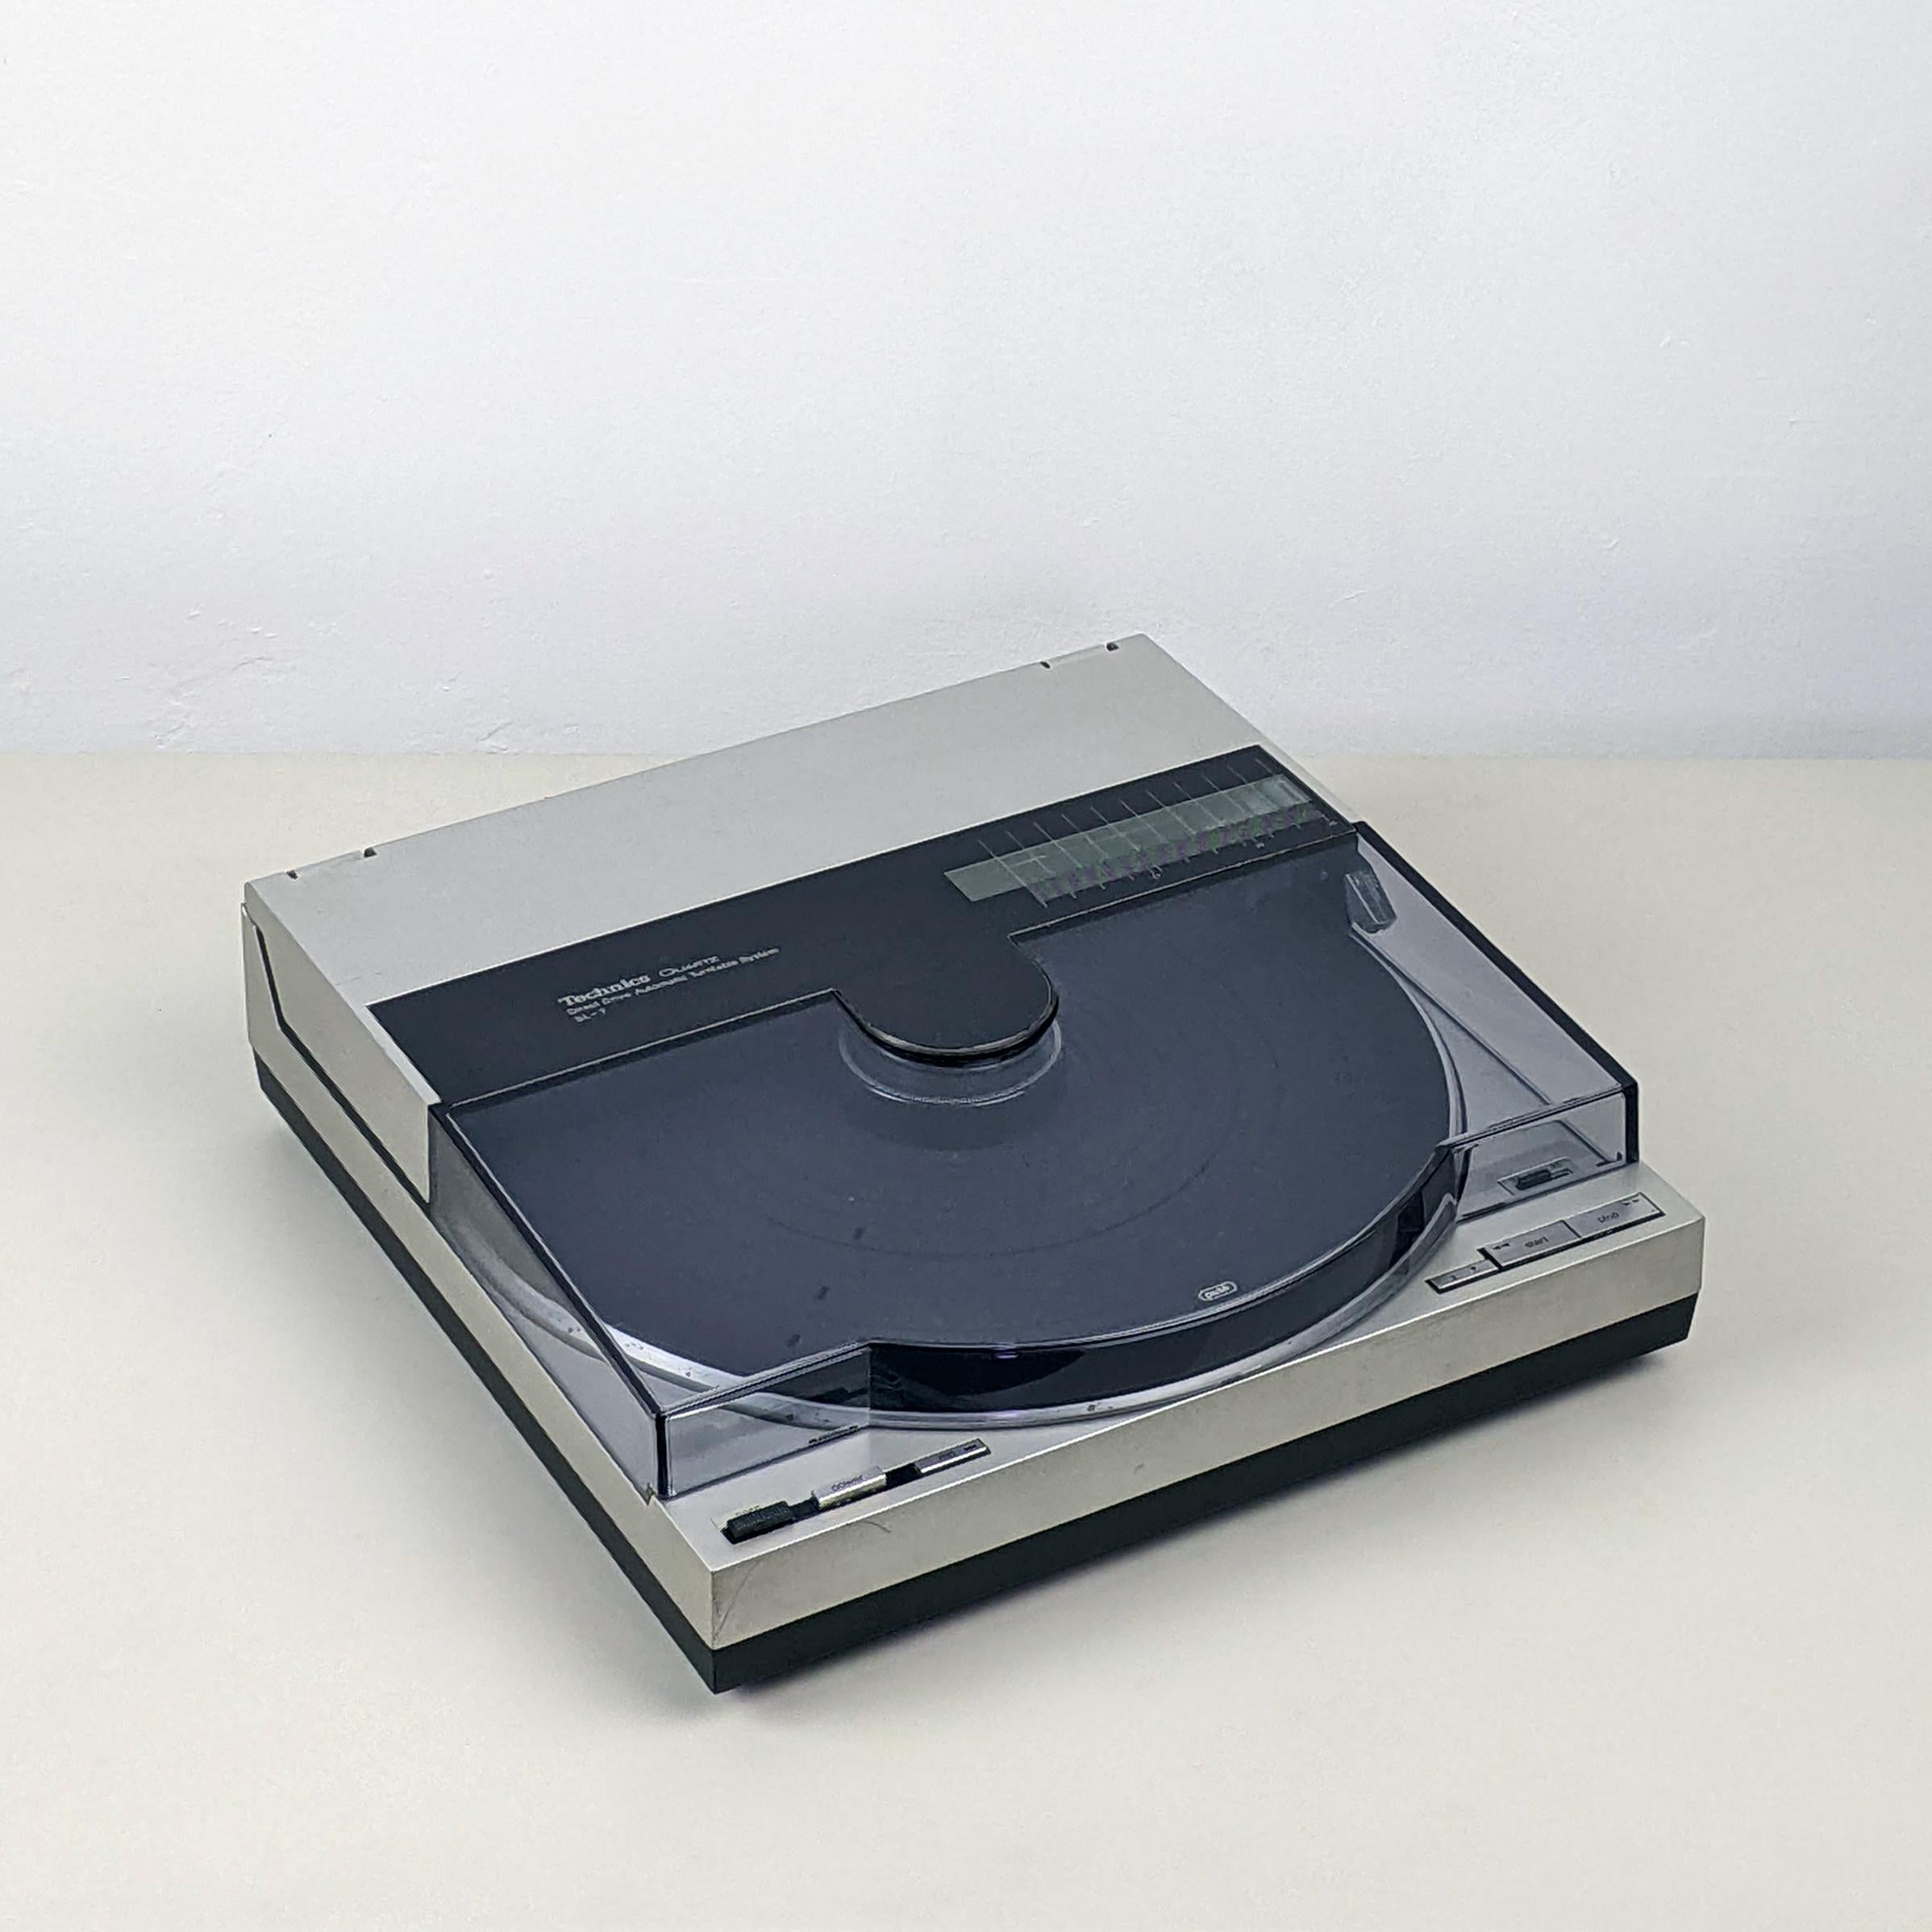 Technics SL-7 XA Turntable, 1981-83
Good condition. Fully functioning. Sounds super.
A great example of this legendary, highly though-of classic turntable.

Cosmetic: The turntable is in good original condition. There are general minor signs of